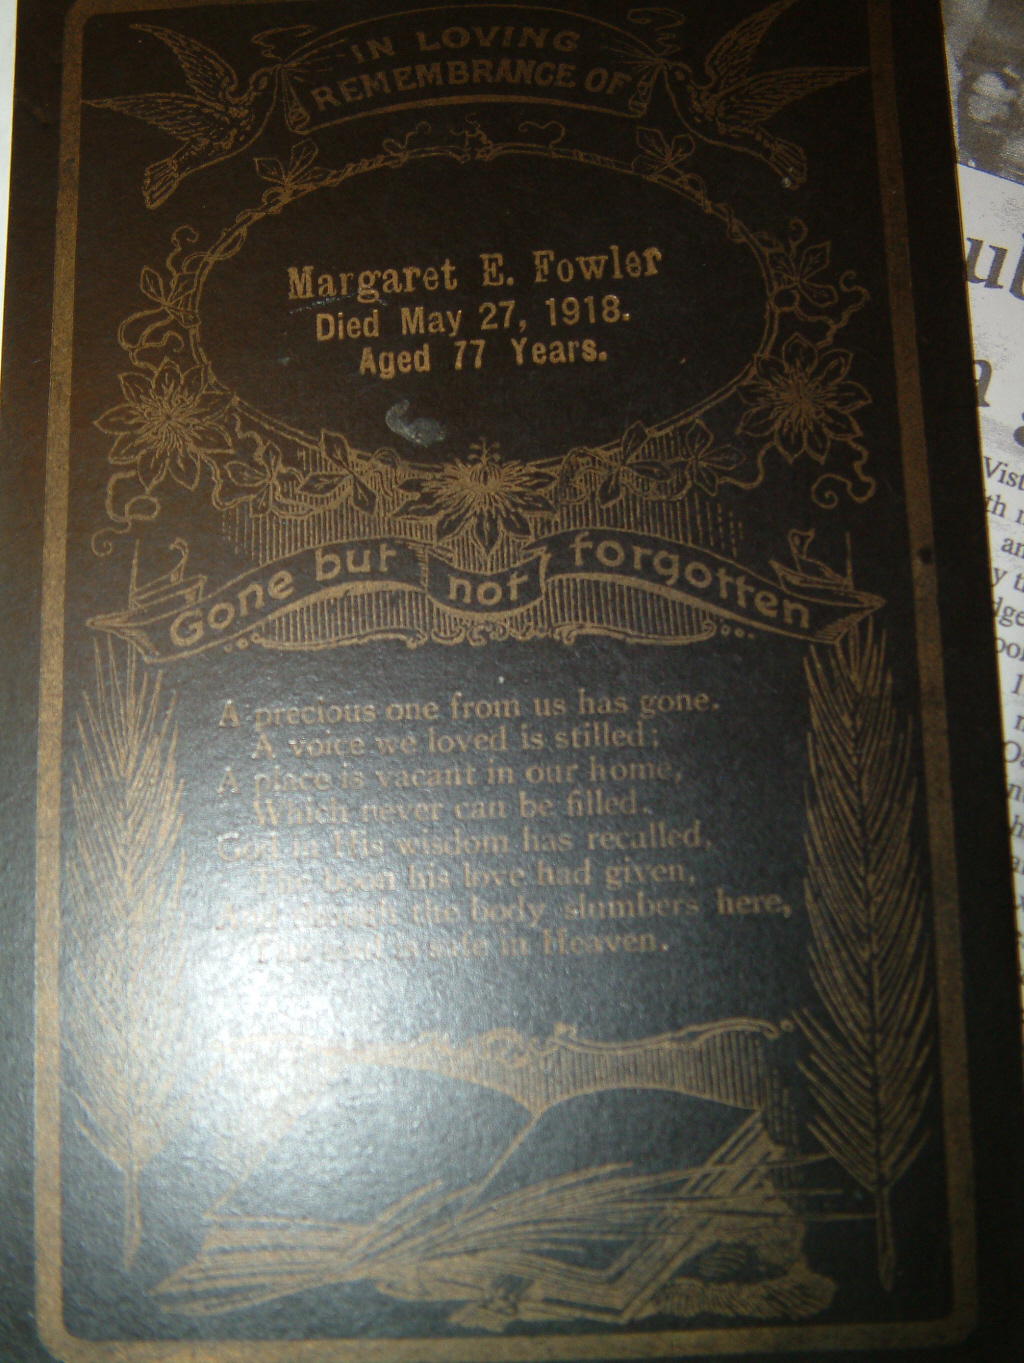 Grampy's mother's funeral card